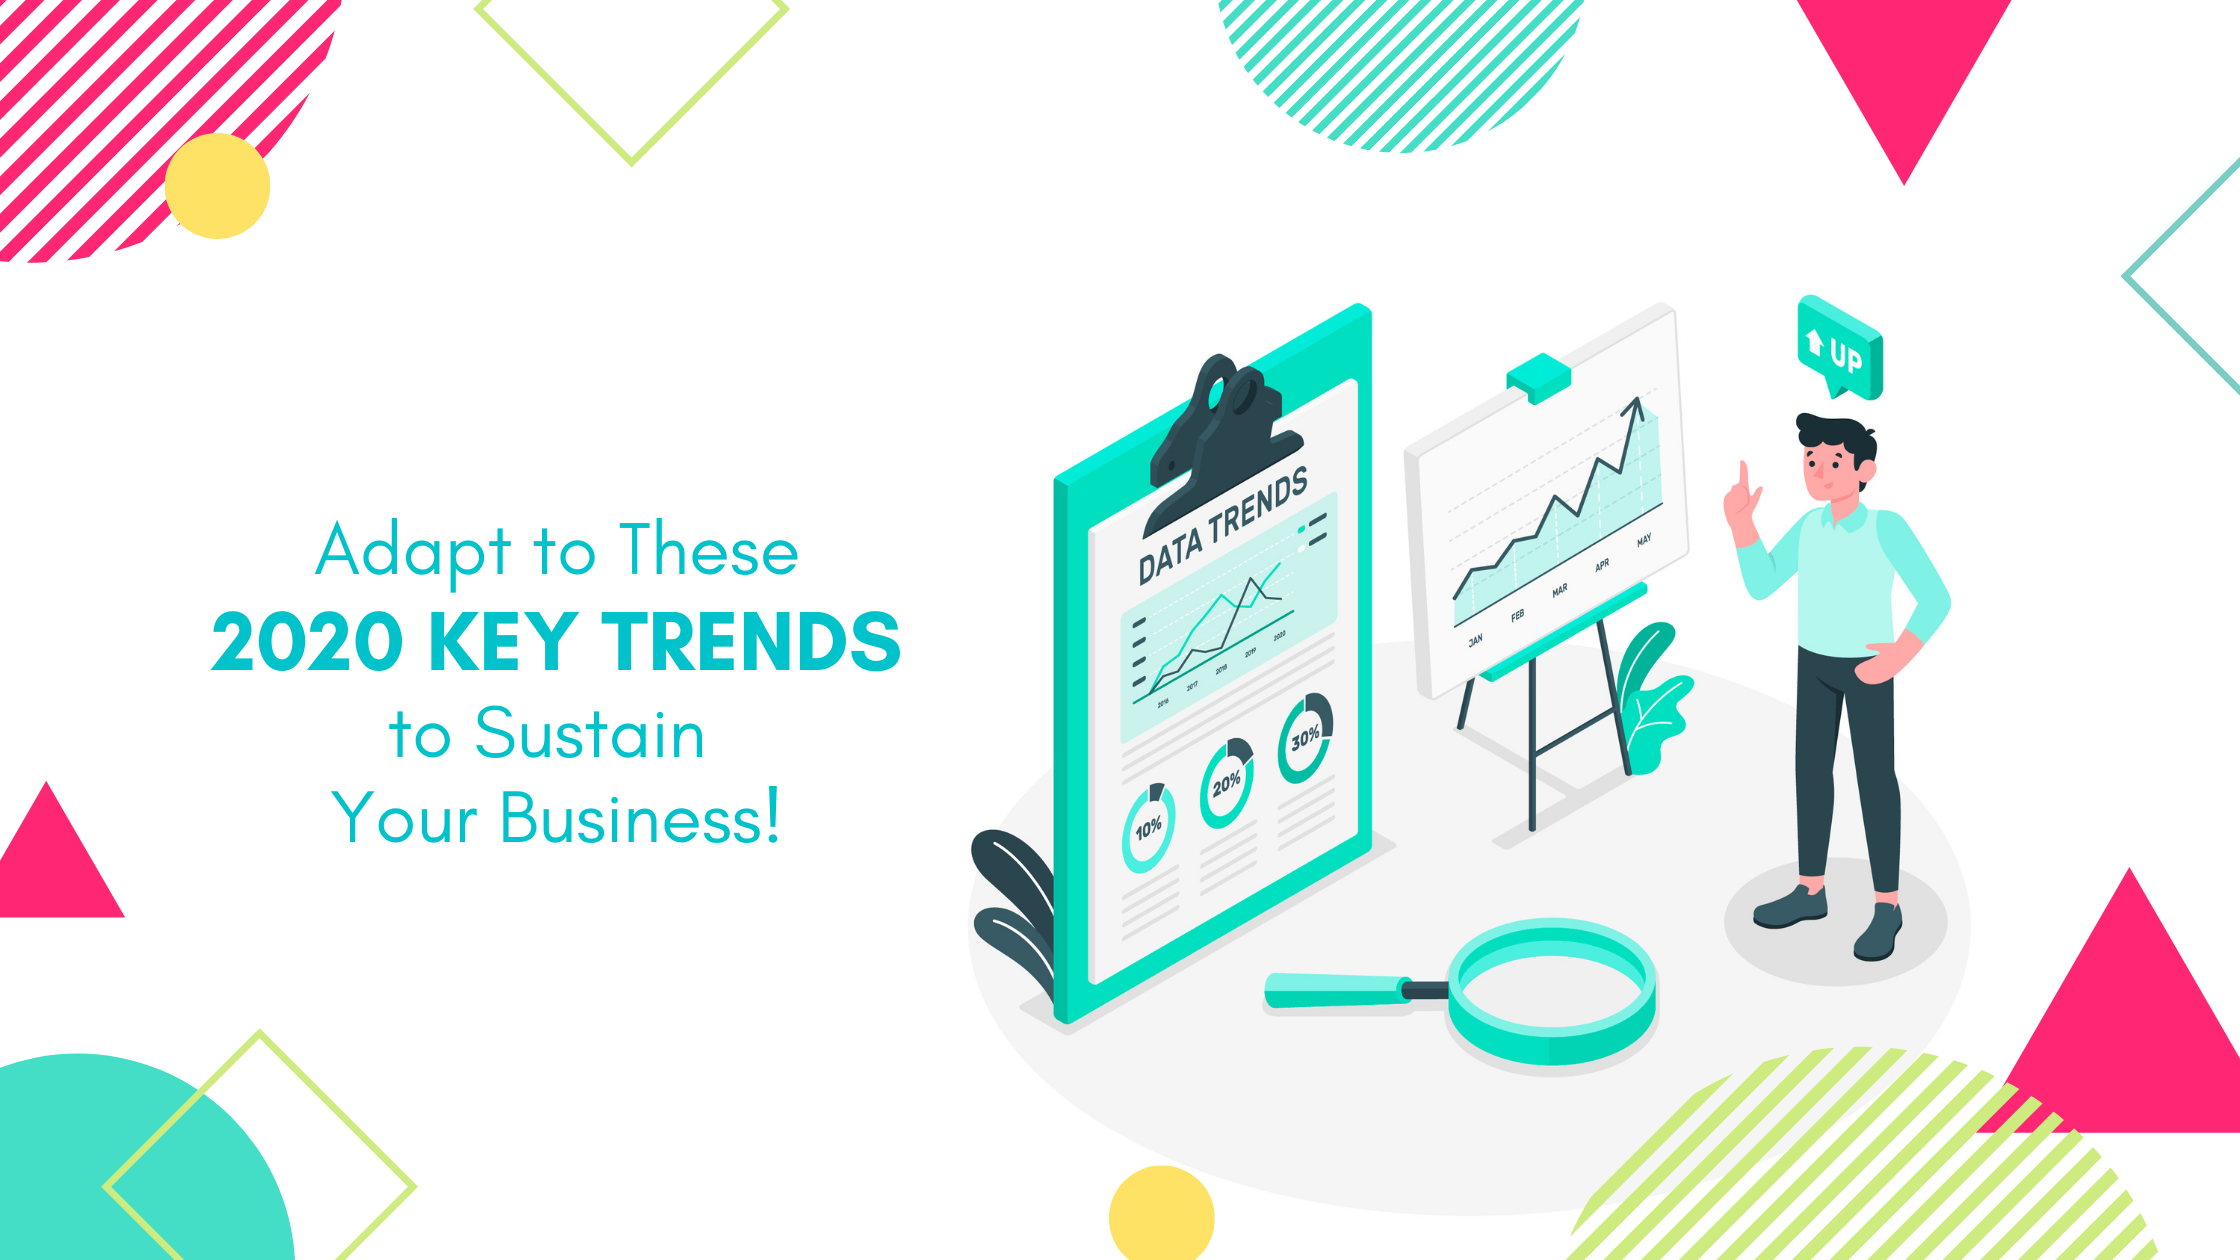 Emerging Business Trends and How Your Business Can Use Them to Your Advantage